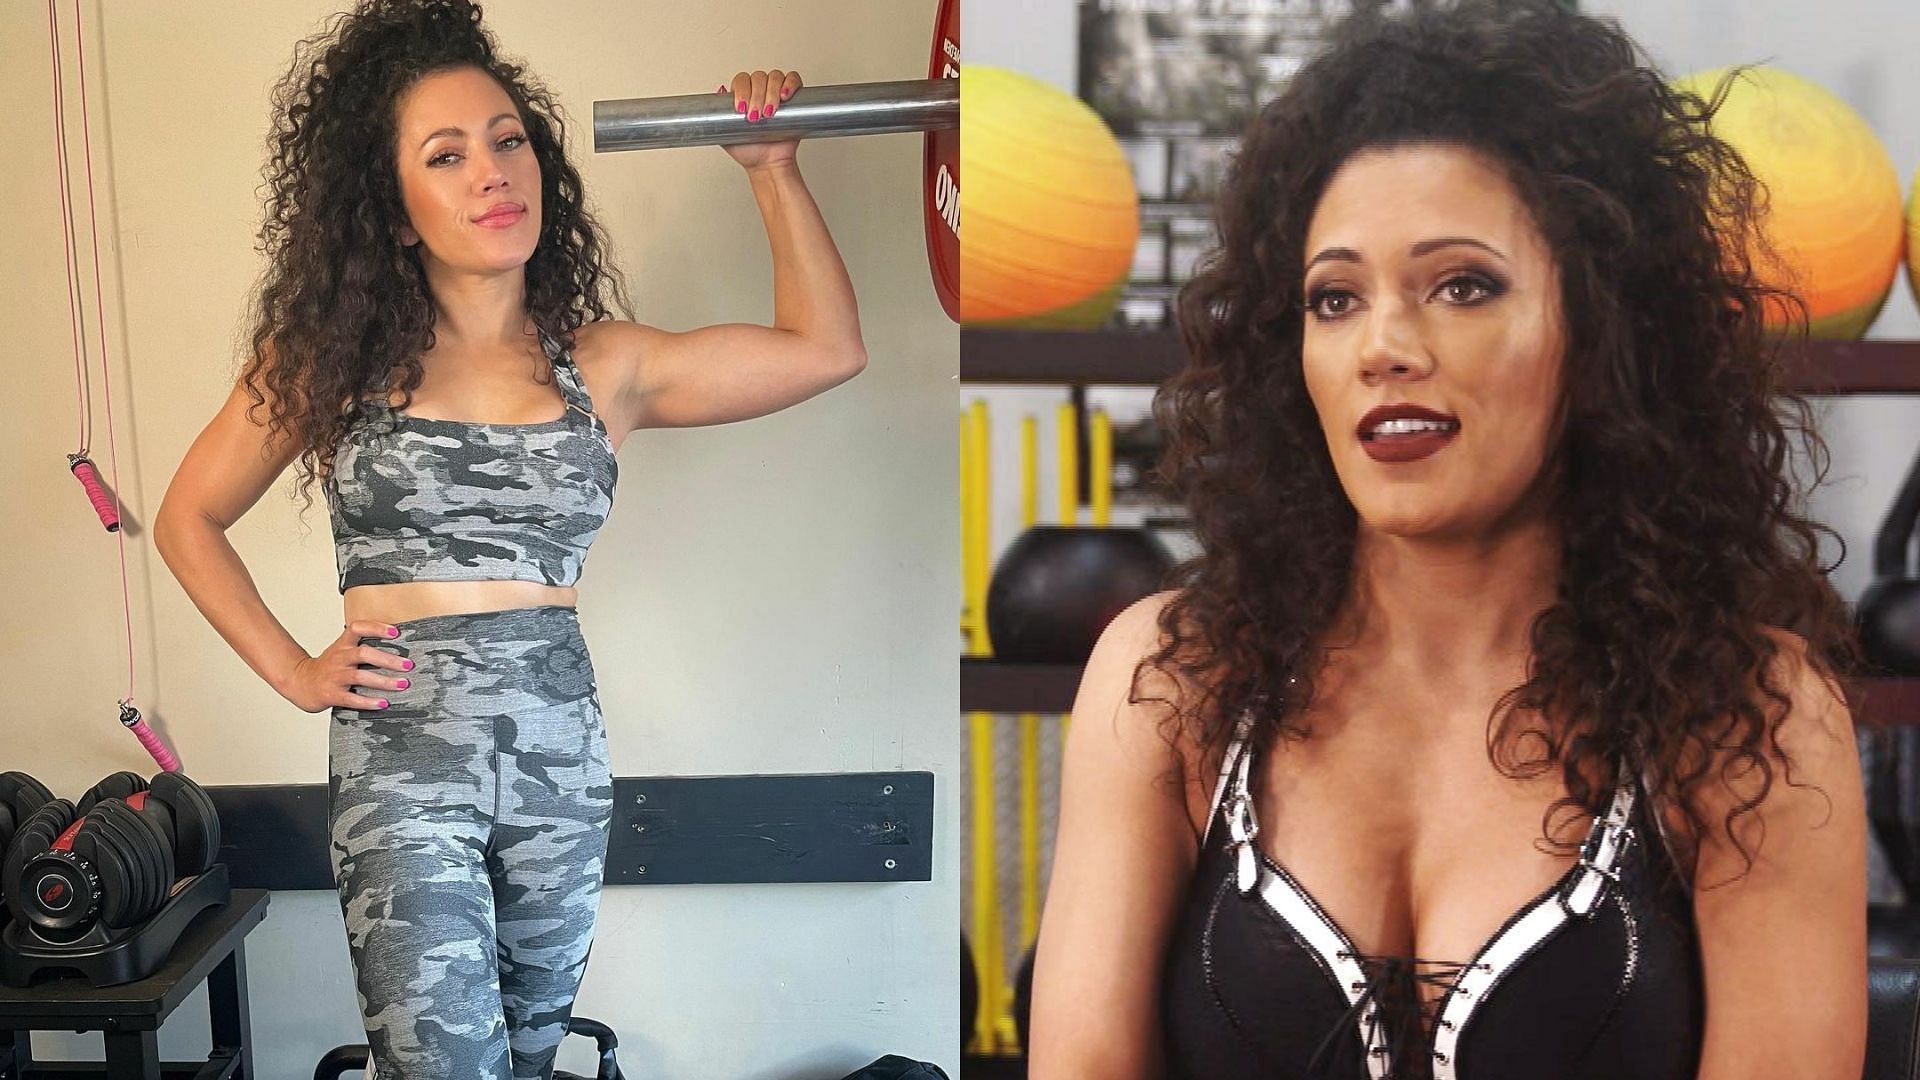 Danielle Kamela made her AEW debut at the latest set of Dark tapings